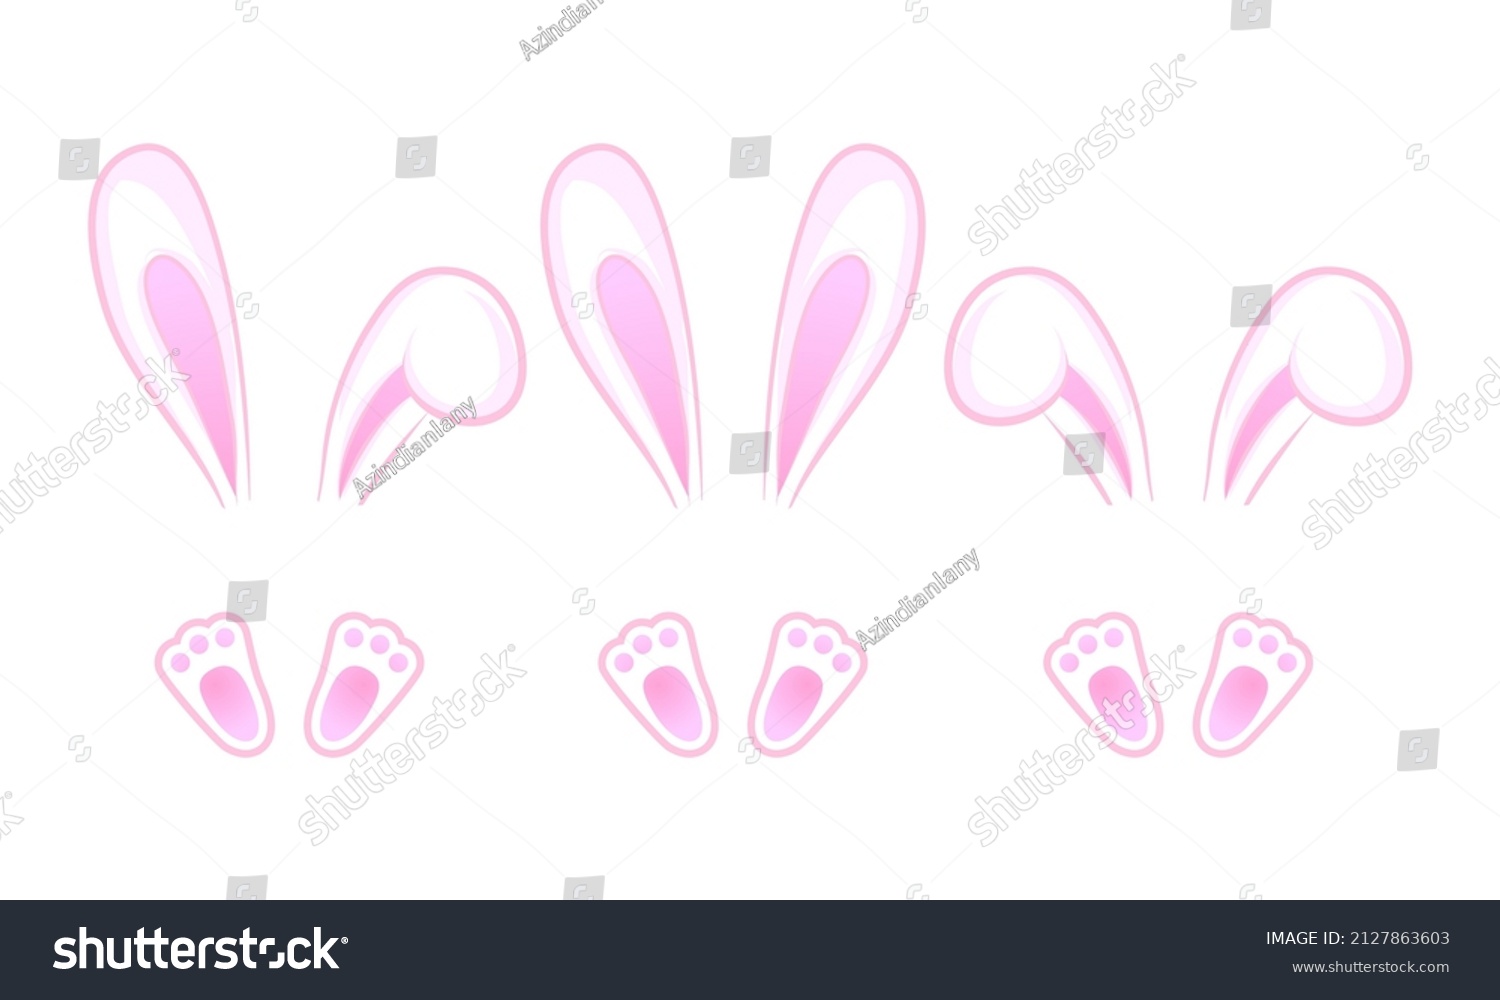 SVG of Easter bunny ears and paws collection. Happy Easter. svg